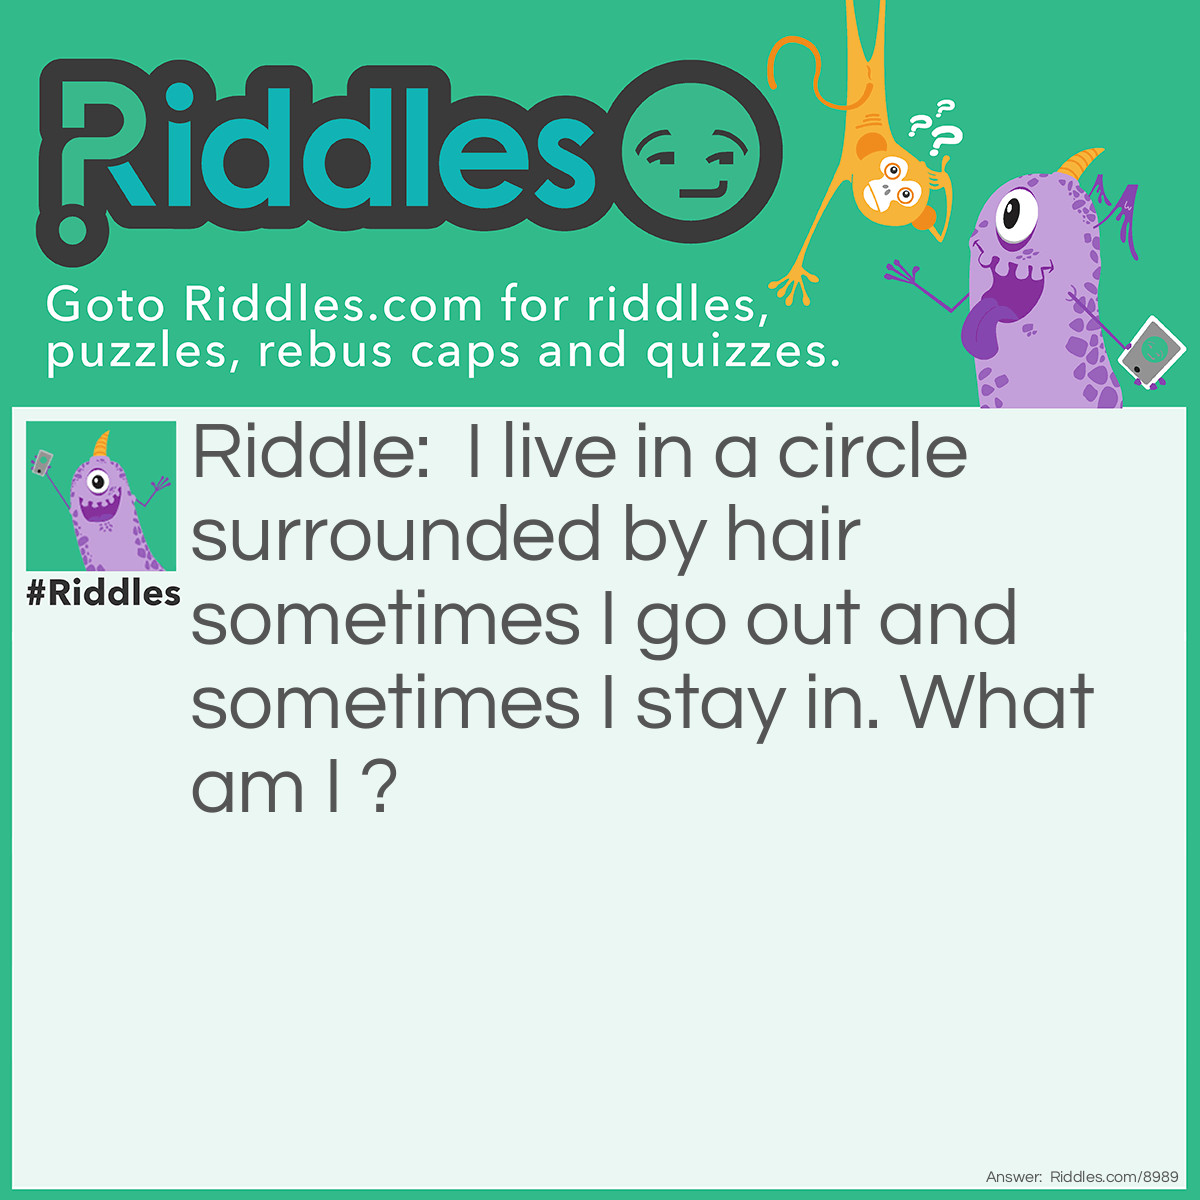 Riddle: I live in a circle surrounded by hair sometimes I go out and sometimes I stay in. What am I? Answer: A Belly Button